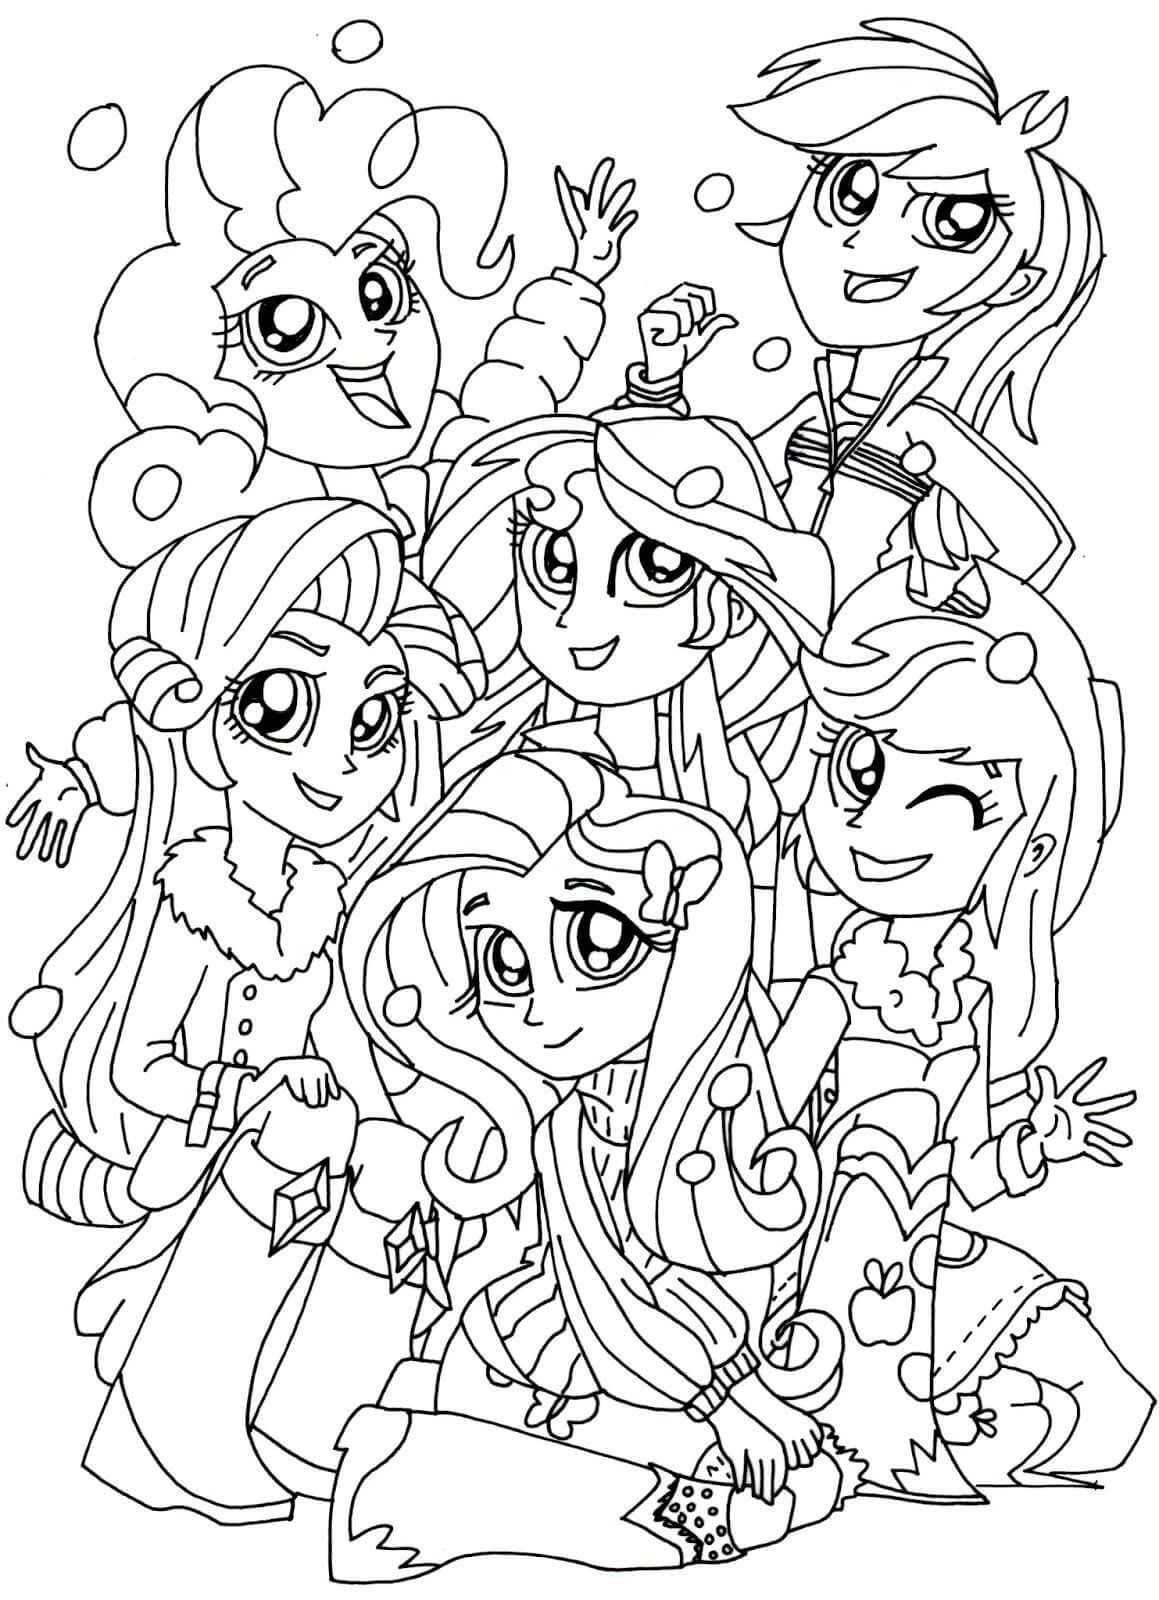 My Little Pony Equestria Girl Coloring Pictures to Print Wallpaper